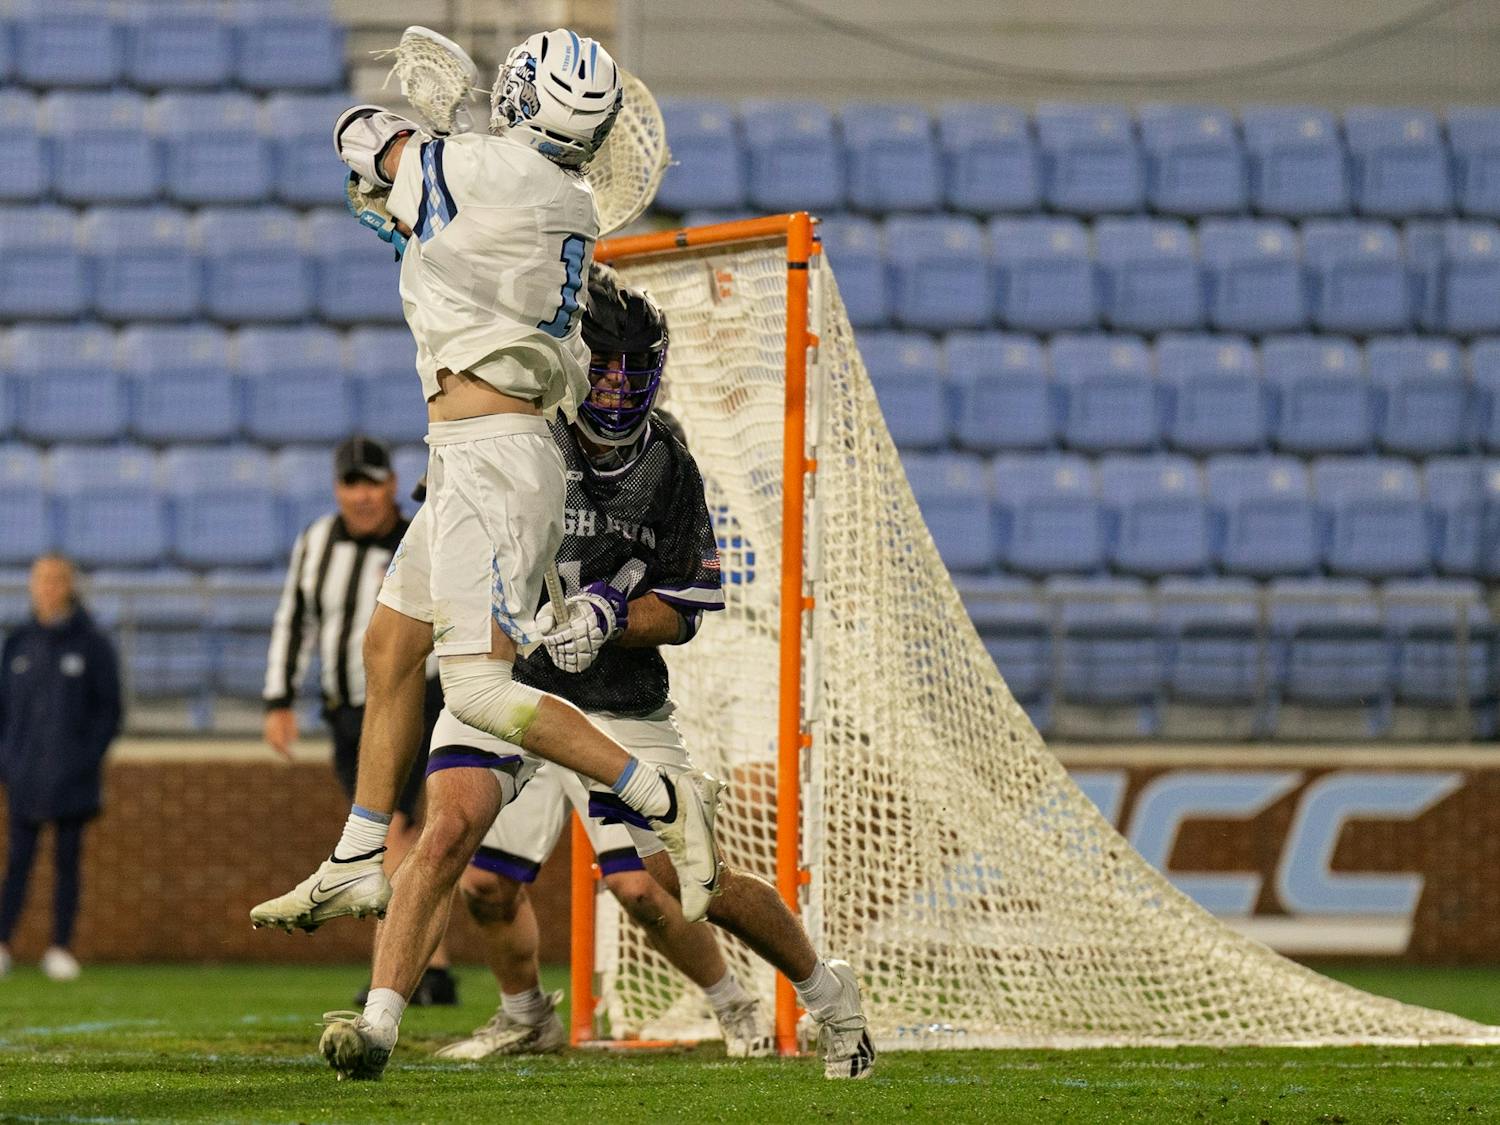 UNC graduate attacker Logan McGovern (1) attempts to score during the men's lacrosse game against High Point on Wednesday, March 22, 2023, at Dorrance Field. UNC beat High Point 16-9.